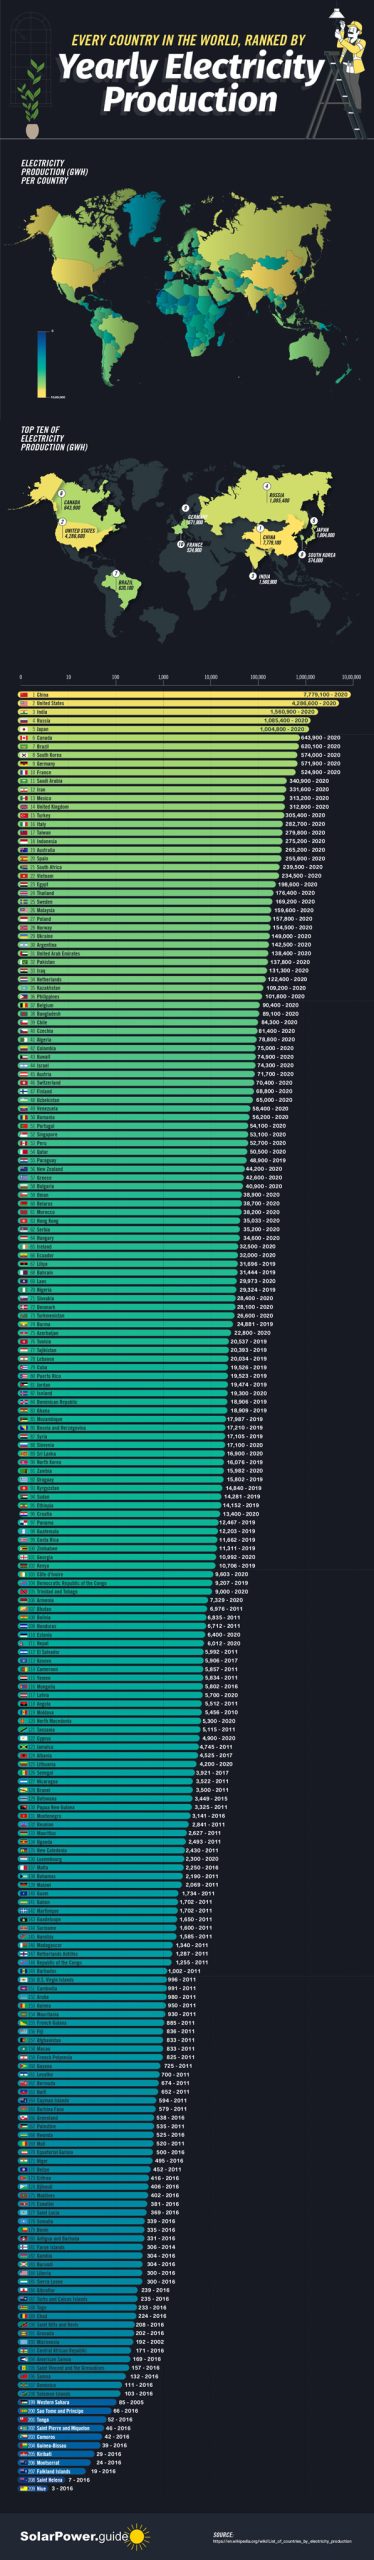 Every Country in the World Ranked by Yearly Electricity Production